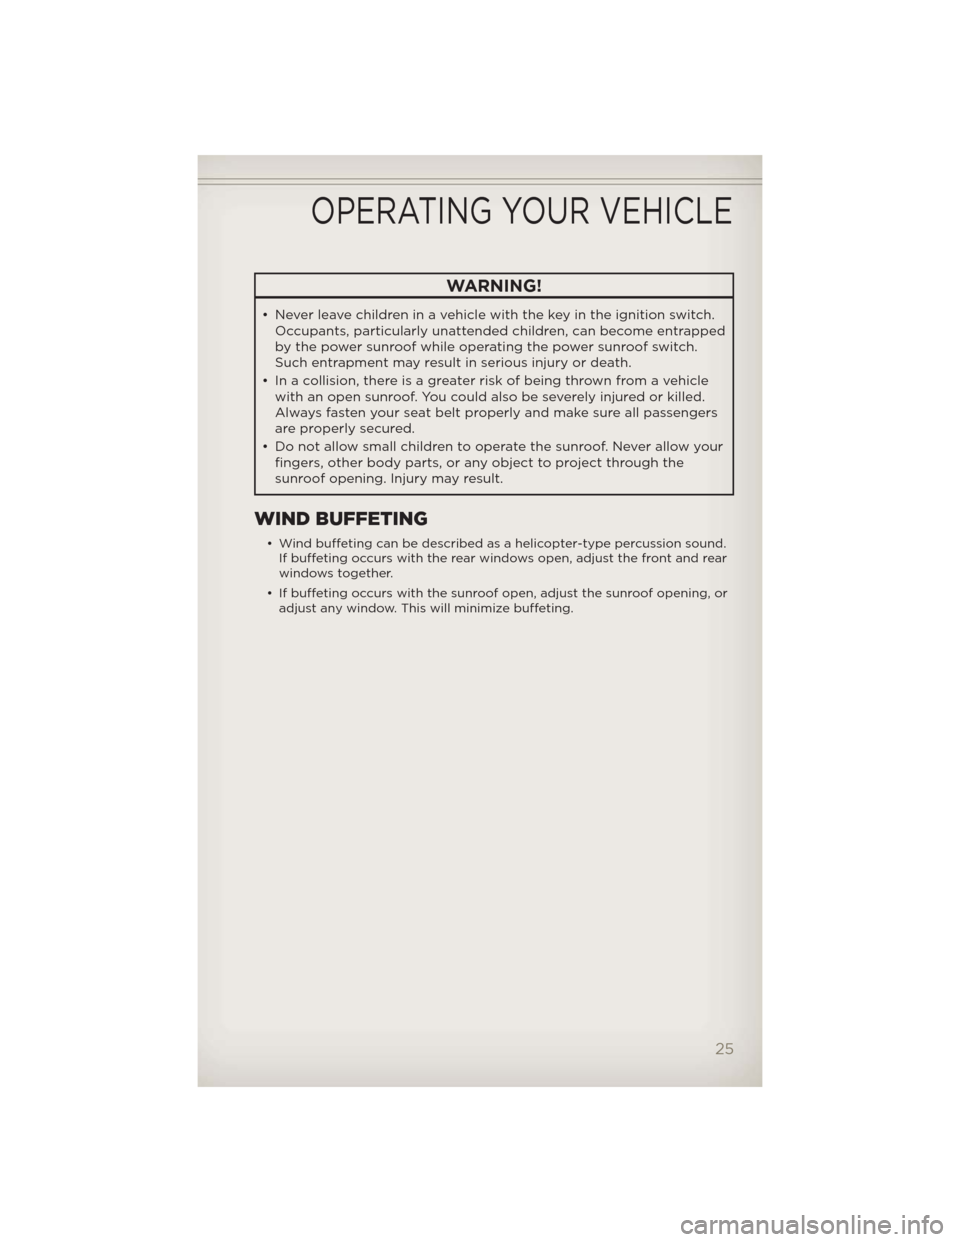 JEEP PATRIOT 2012 1.G User Guide WARNING!
• Never leave children in a vehicle with the key in the ignition switch.
Occupants, particularly unattended children, can become entrapped
by the power sunroof while operating the power sun